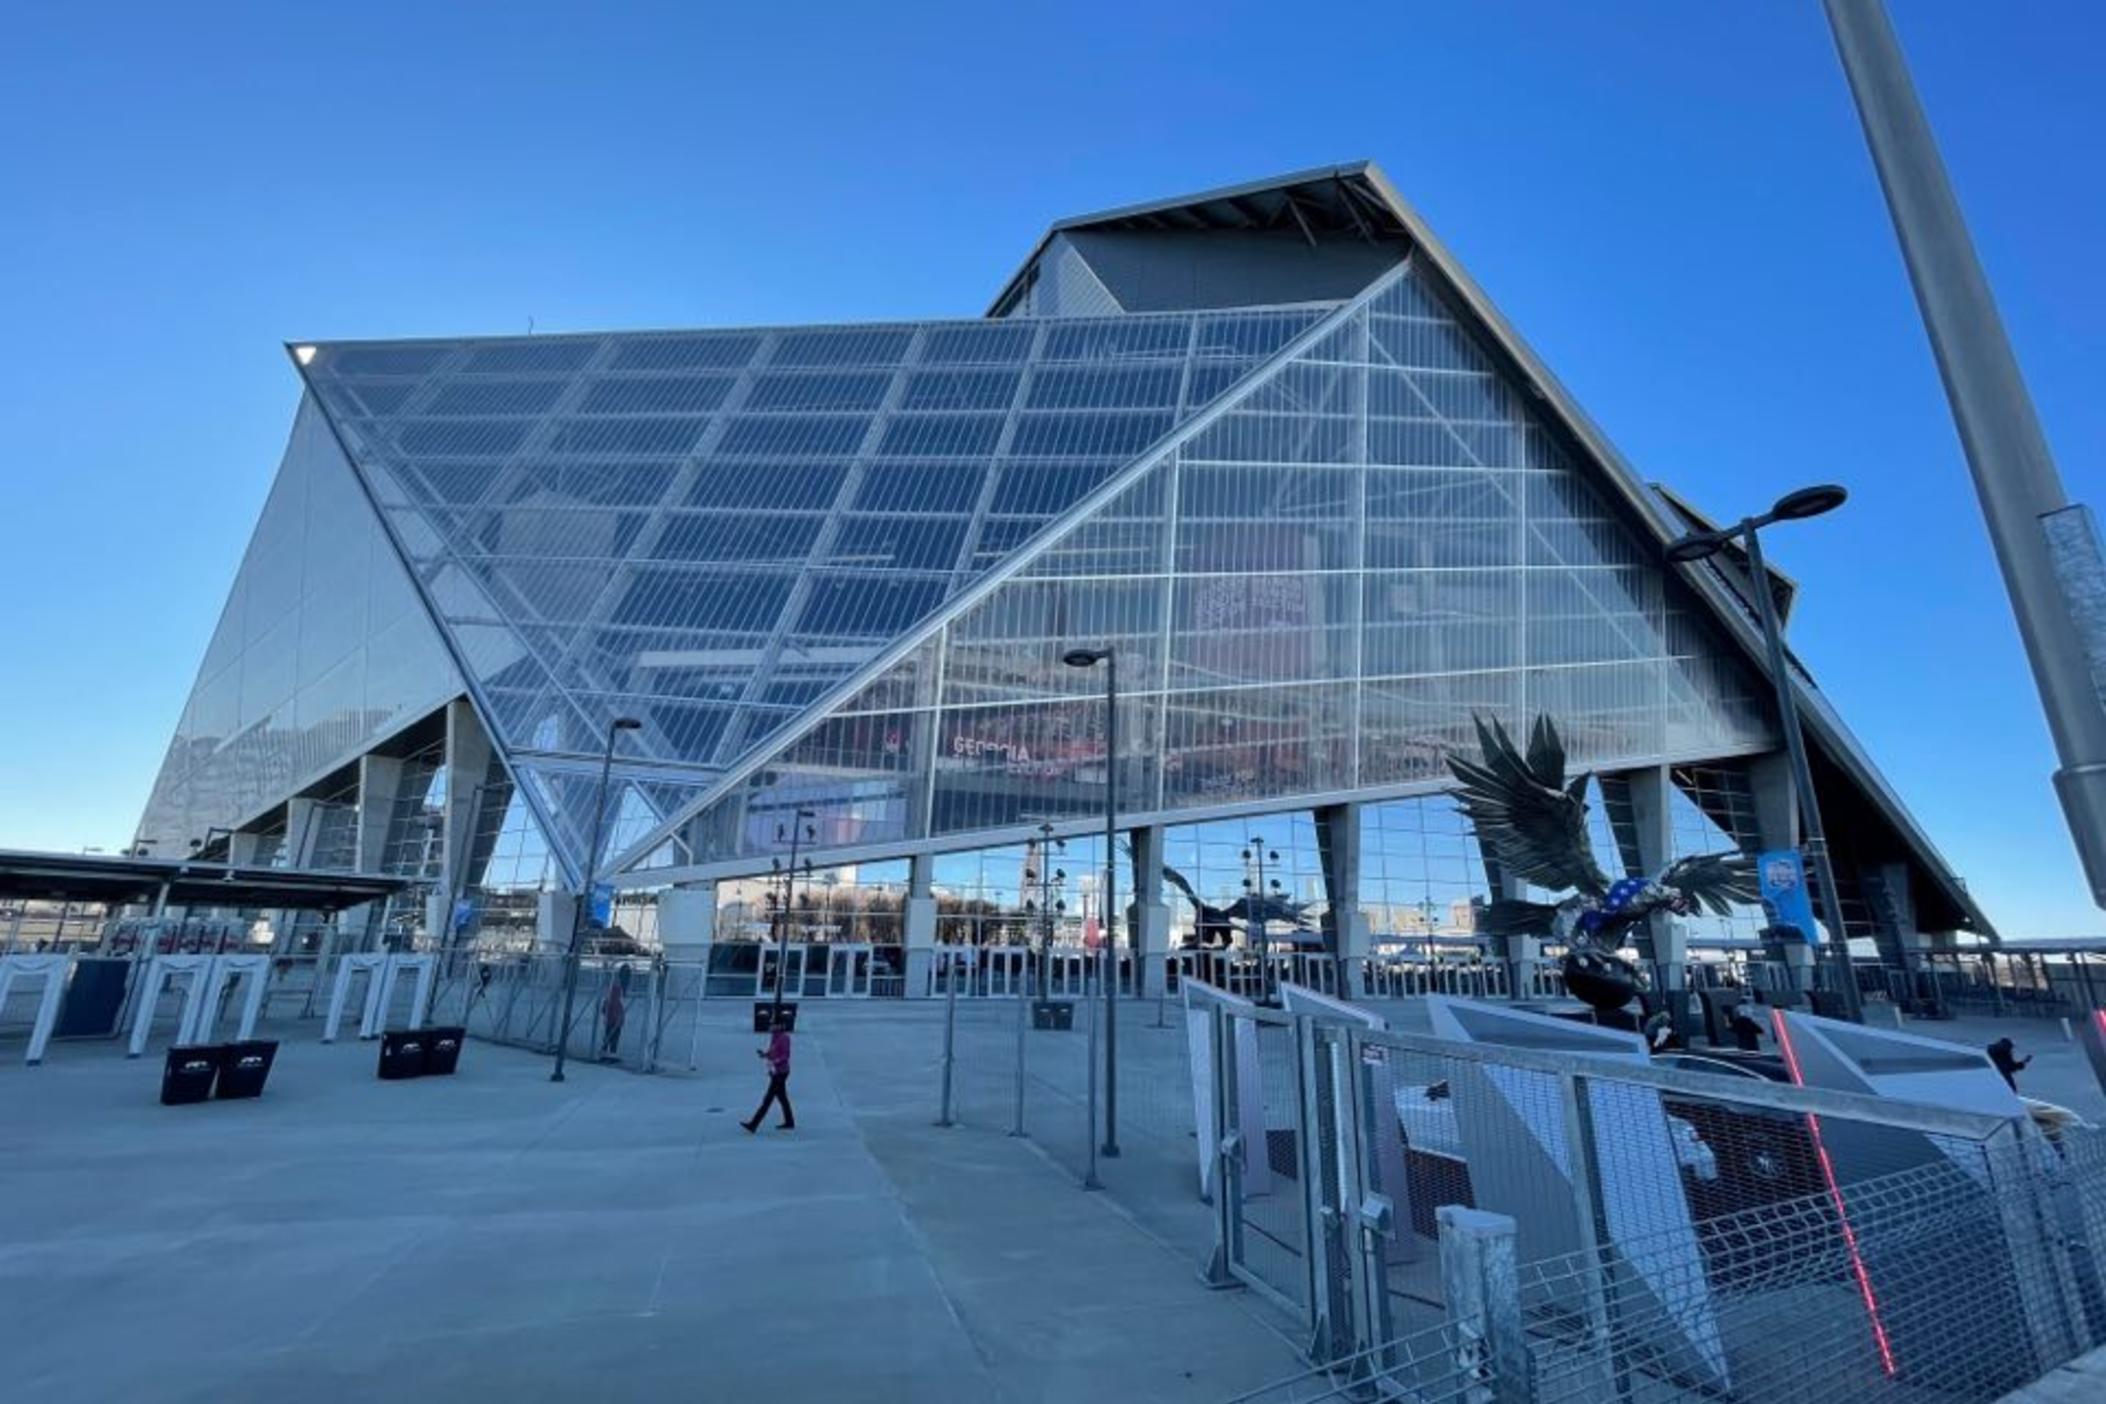 Mercedes-Benz Stadium in downtown Atlanta has become one of several vaccine COVID-19 distribution centers in the state.